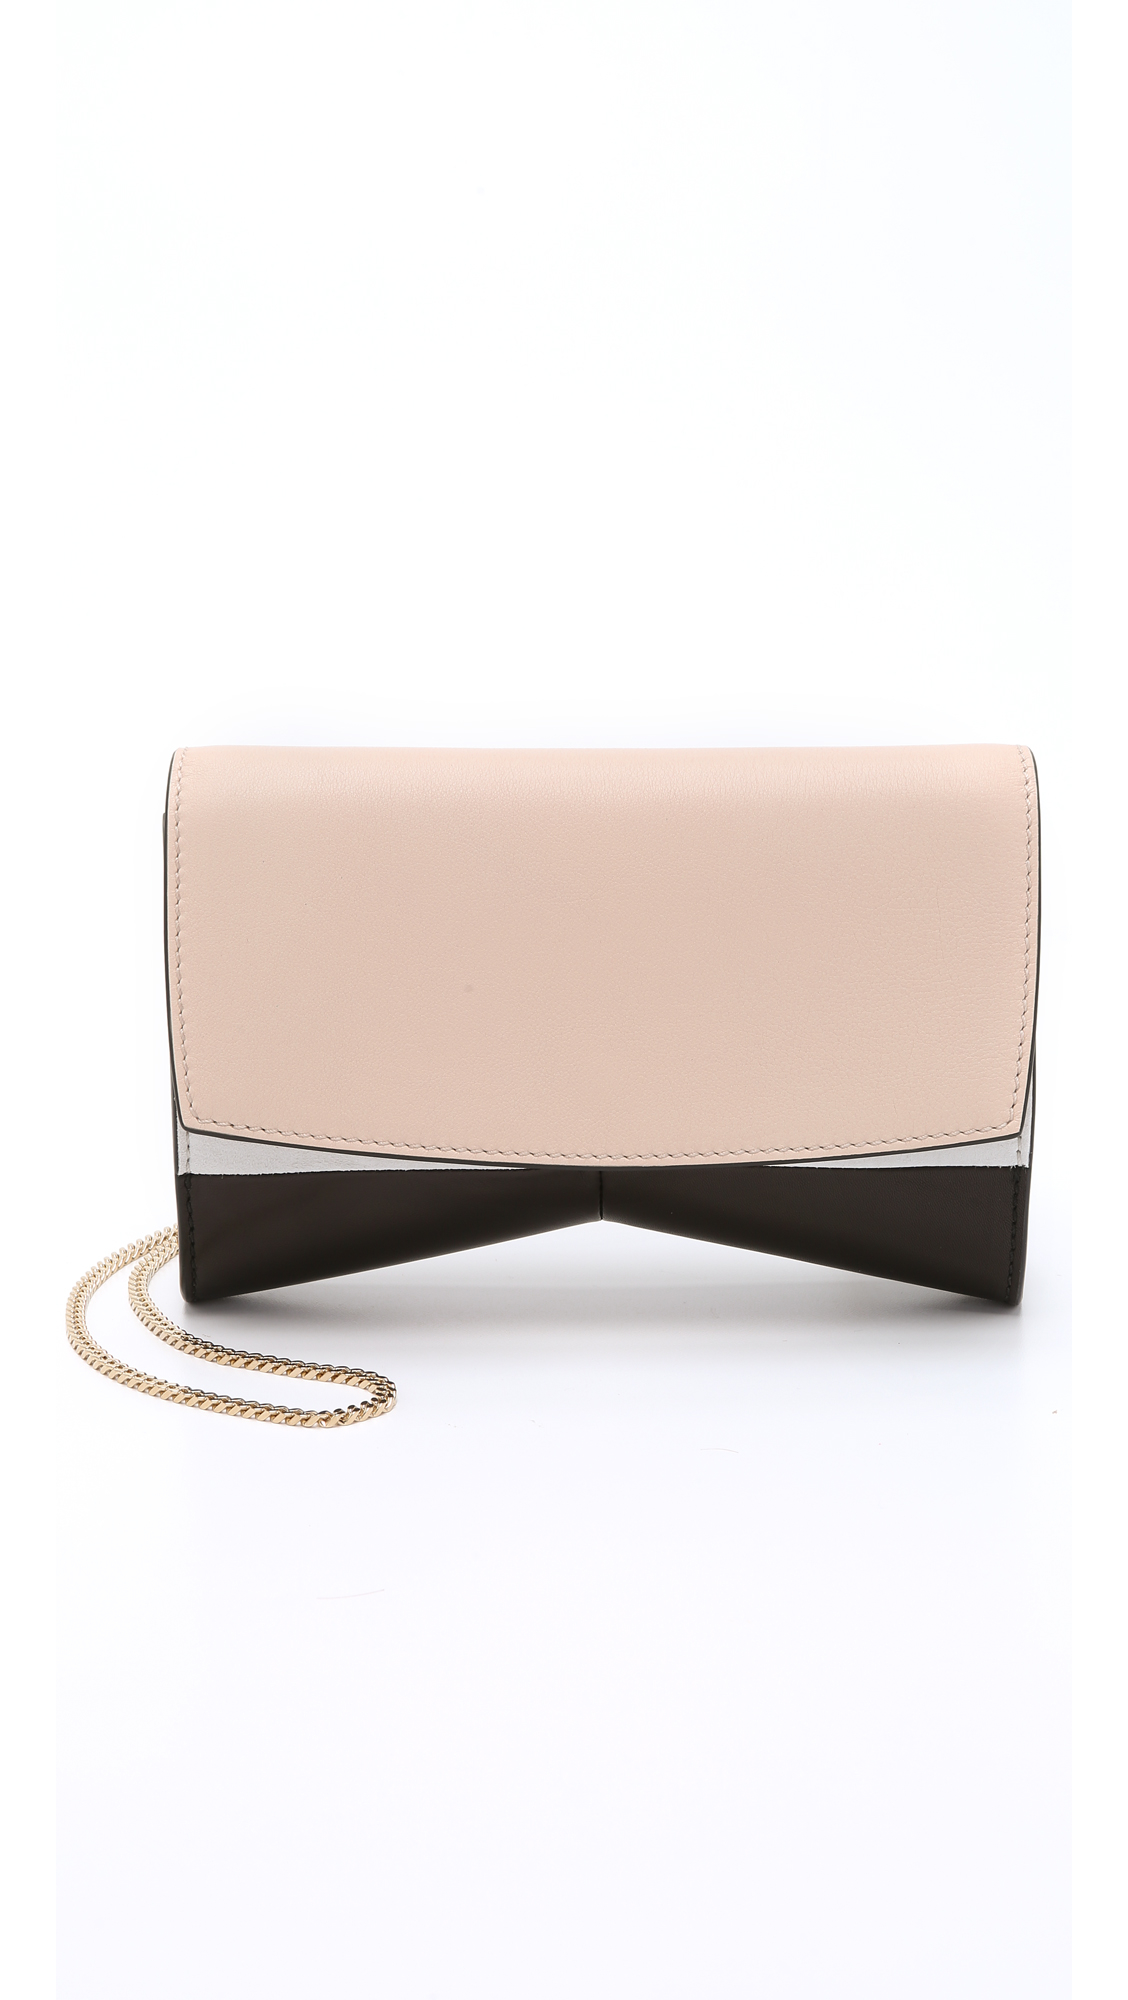 Narciso Rodriguez Rachel Small Evening Clutch - Nude/black in Natural | Lyst